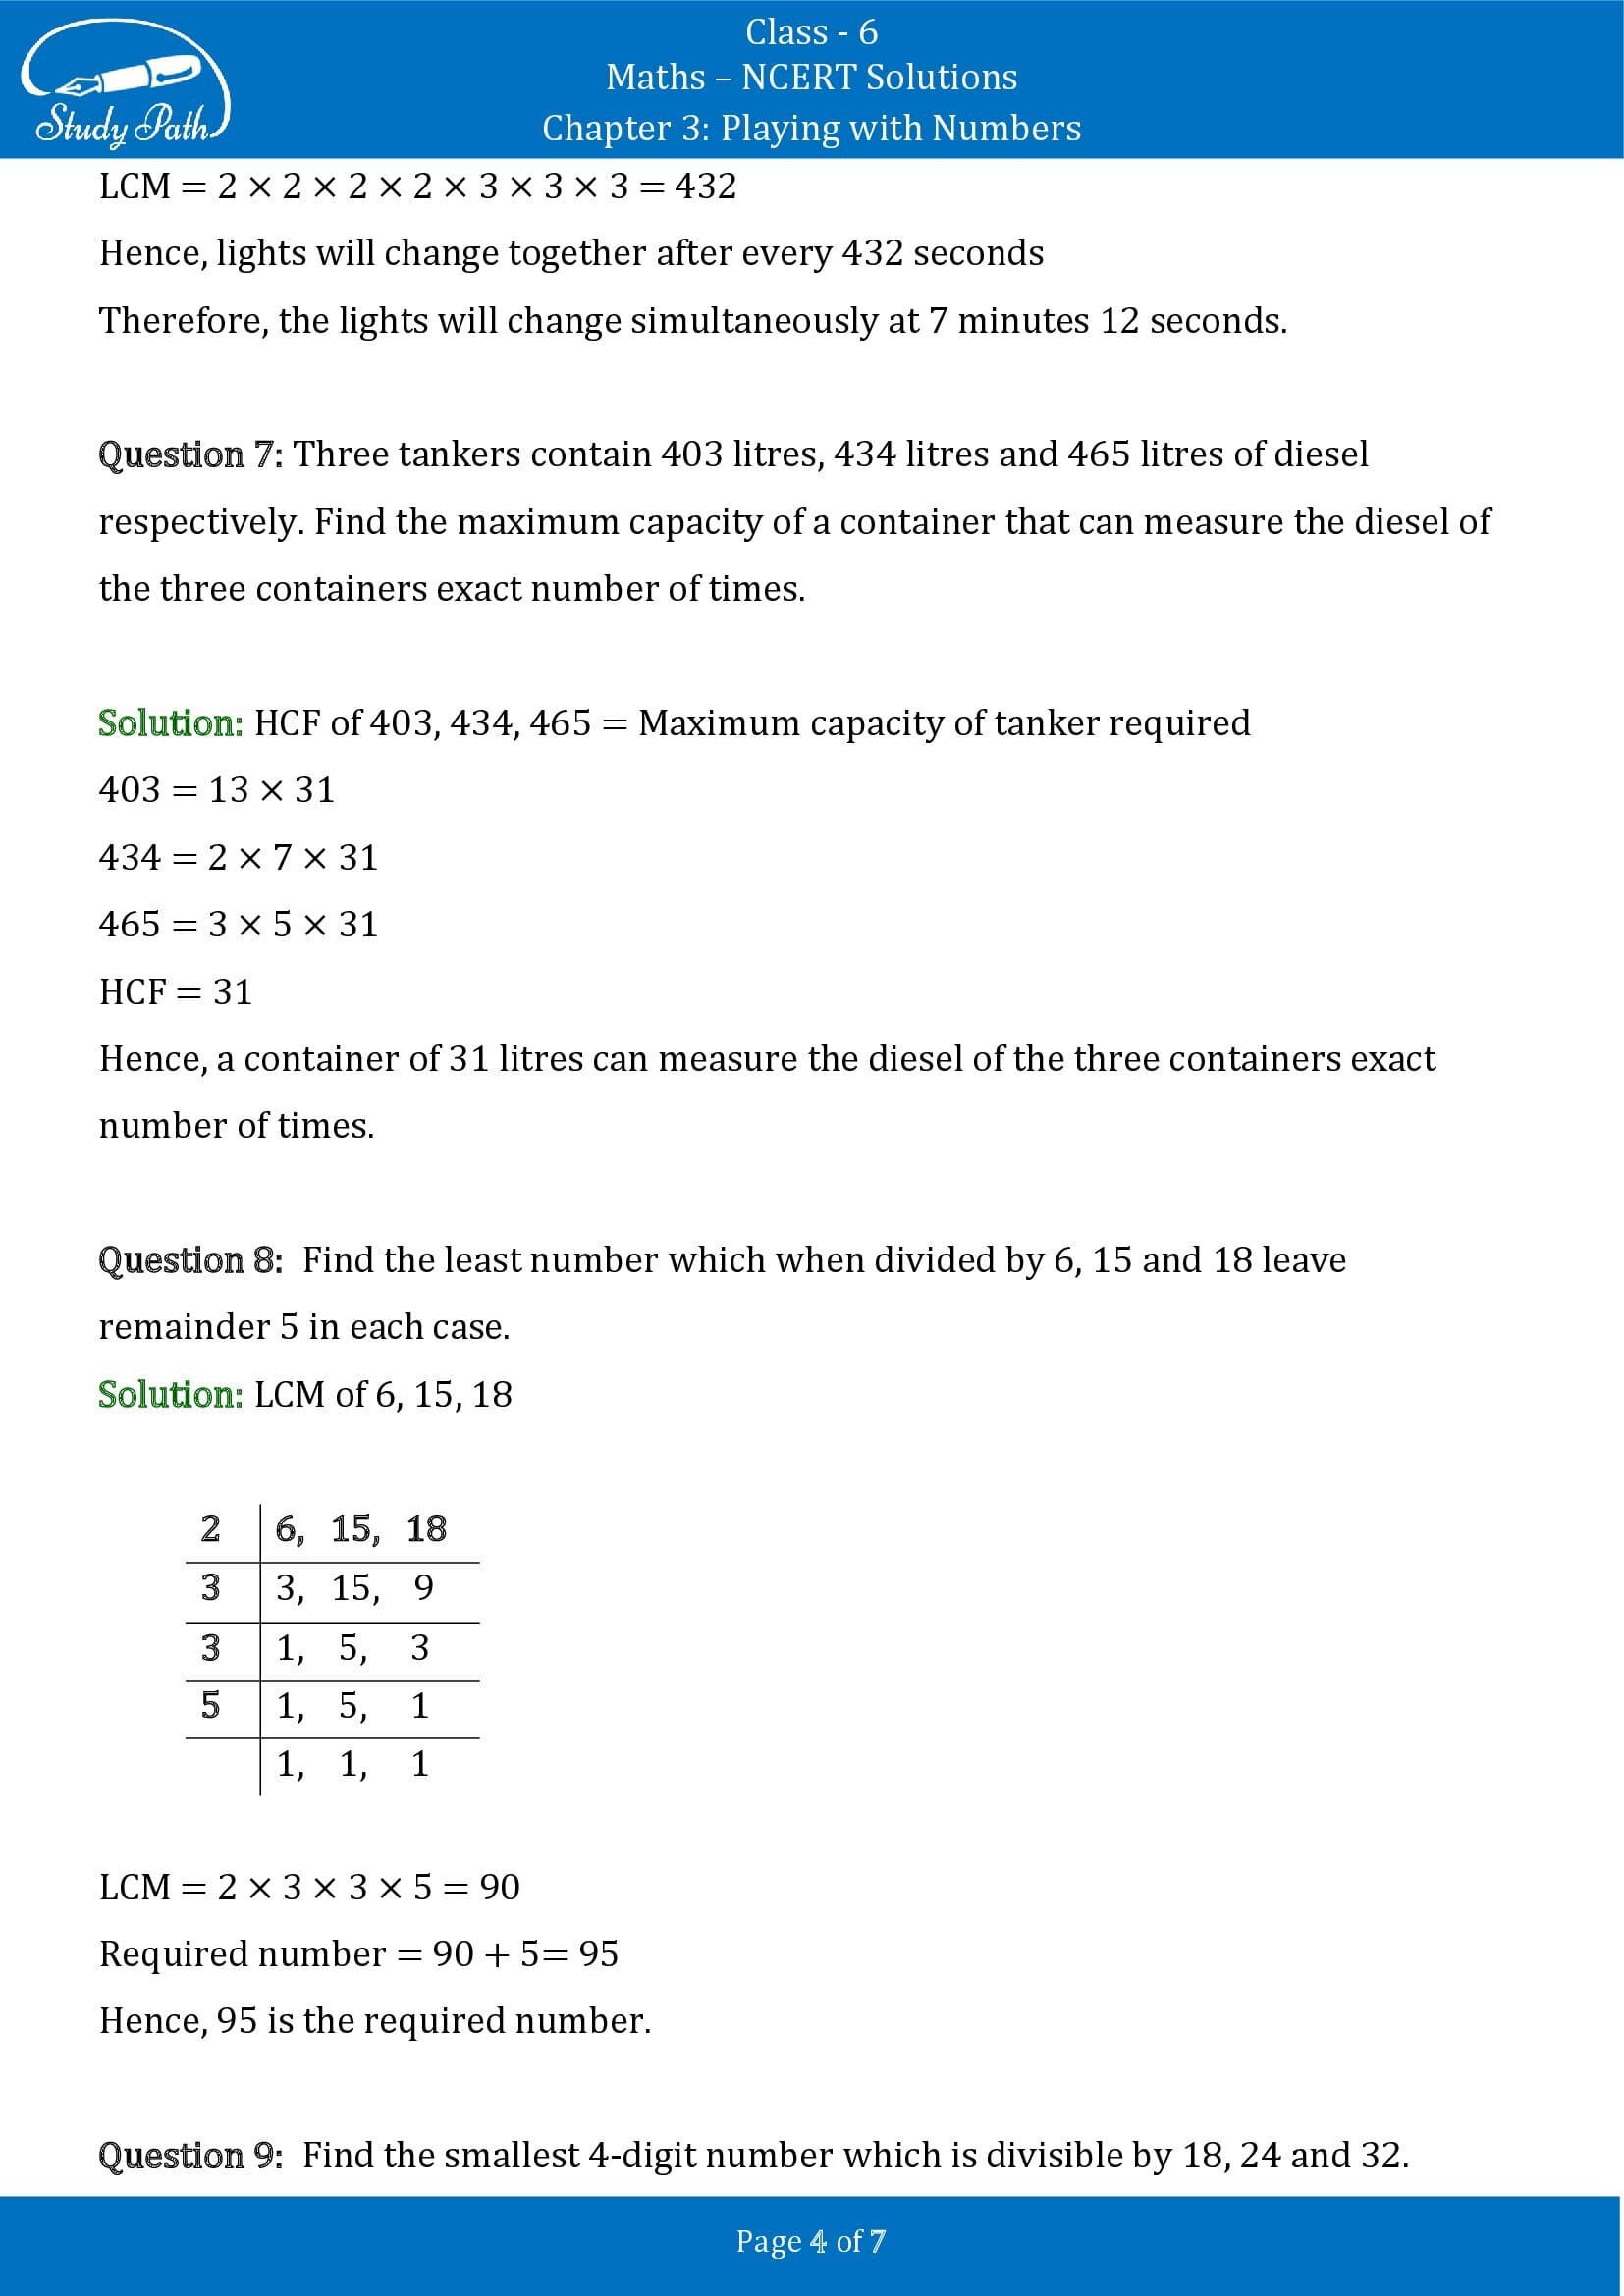 NCERT Solutions for Class 6 Maths Chapter 3 Playing with Numbers Exercise 3.7 00004